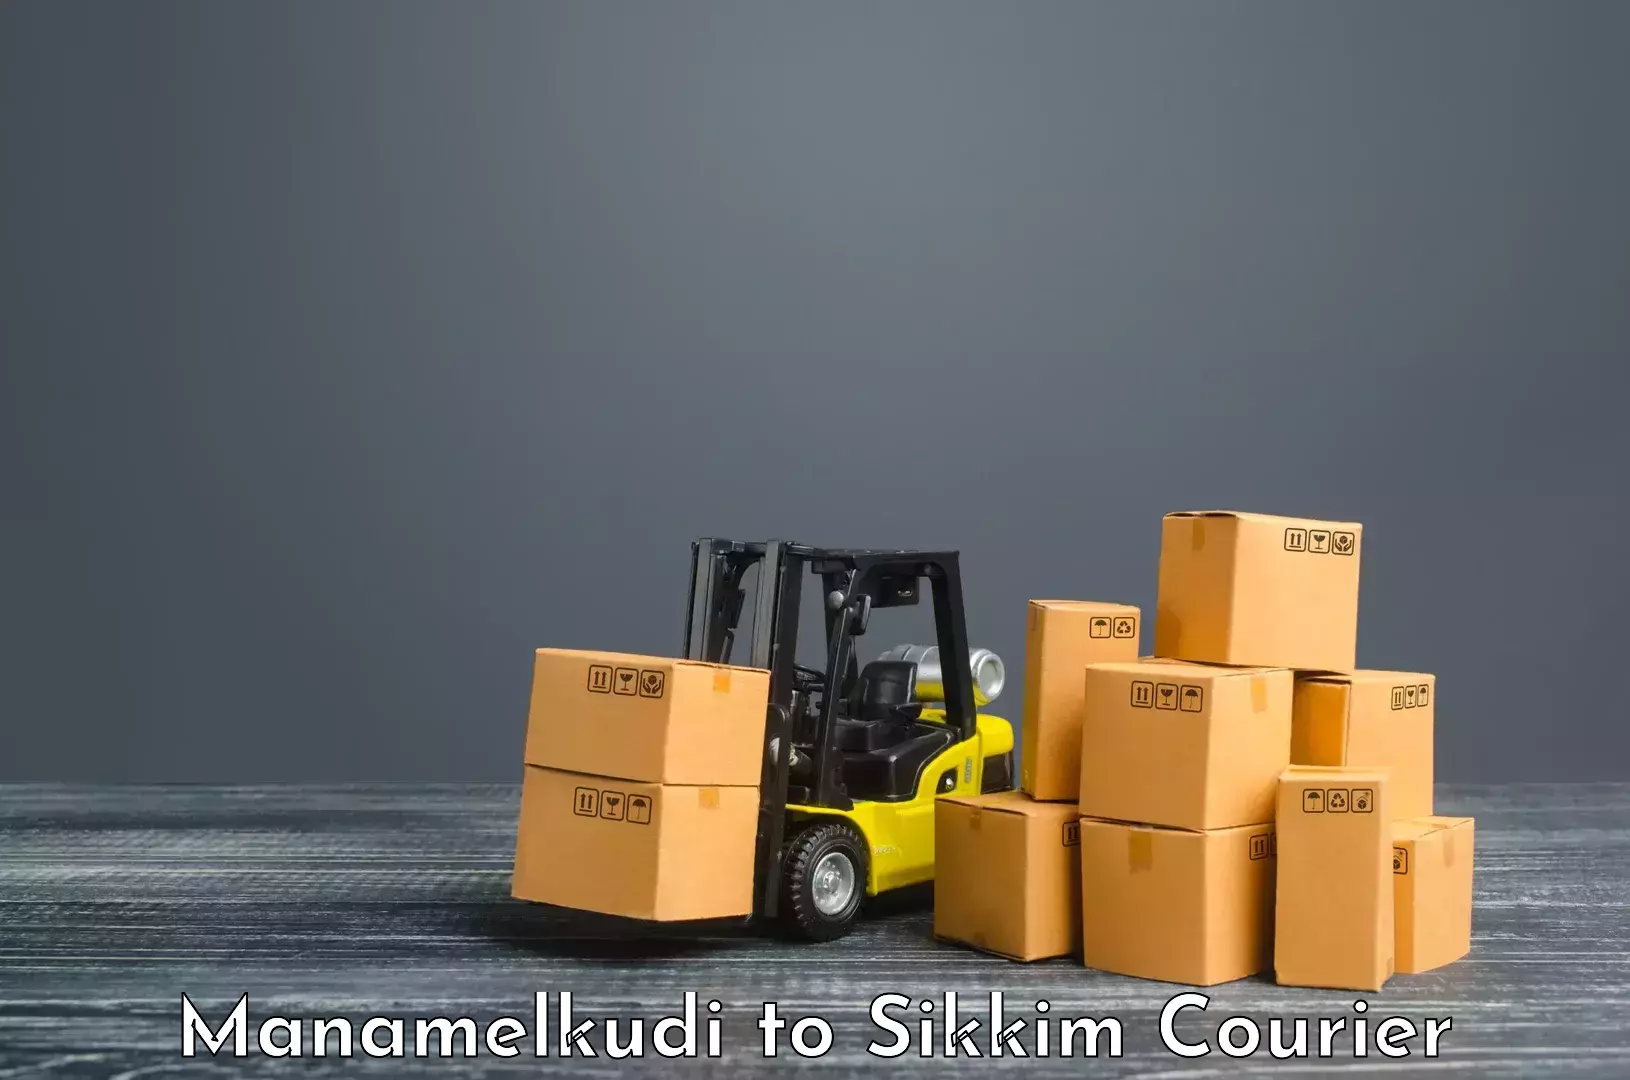 State-of-the-art courier technology Manamelkudi to Namchi